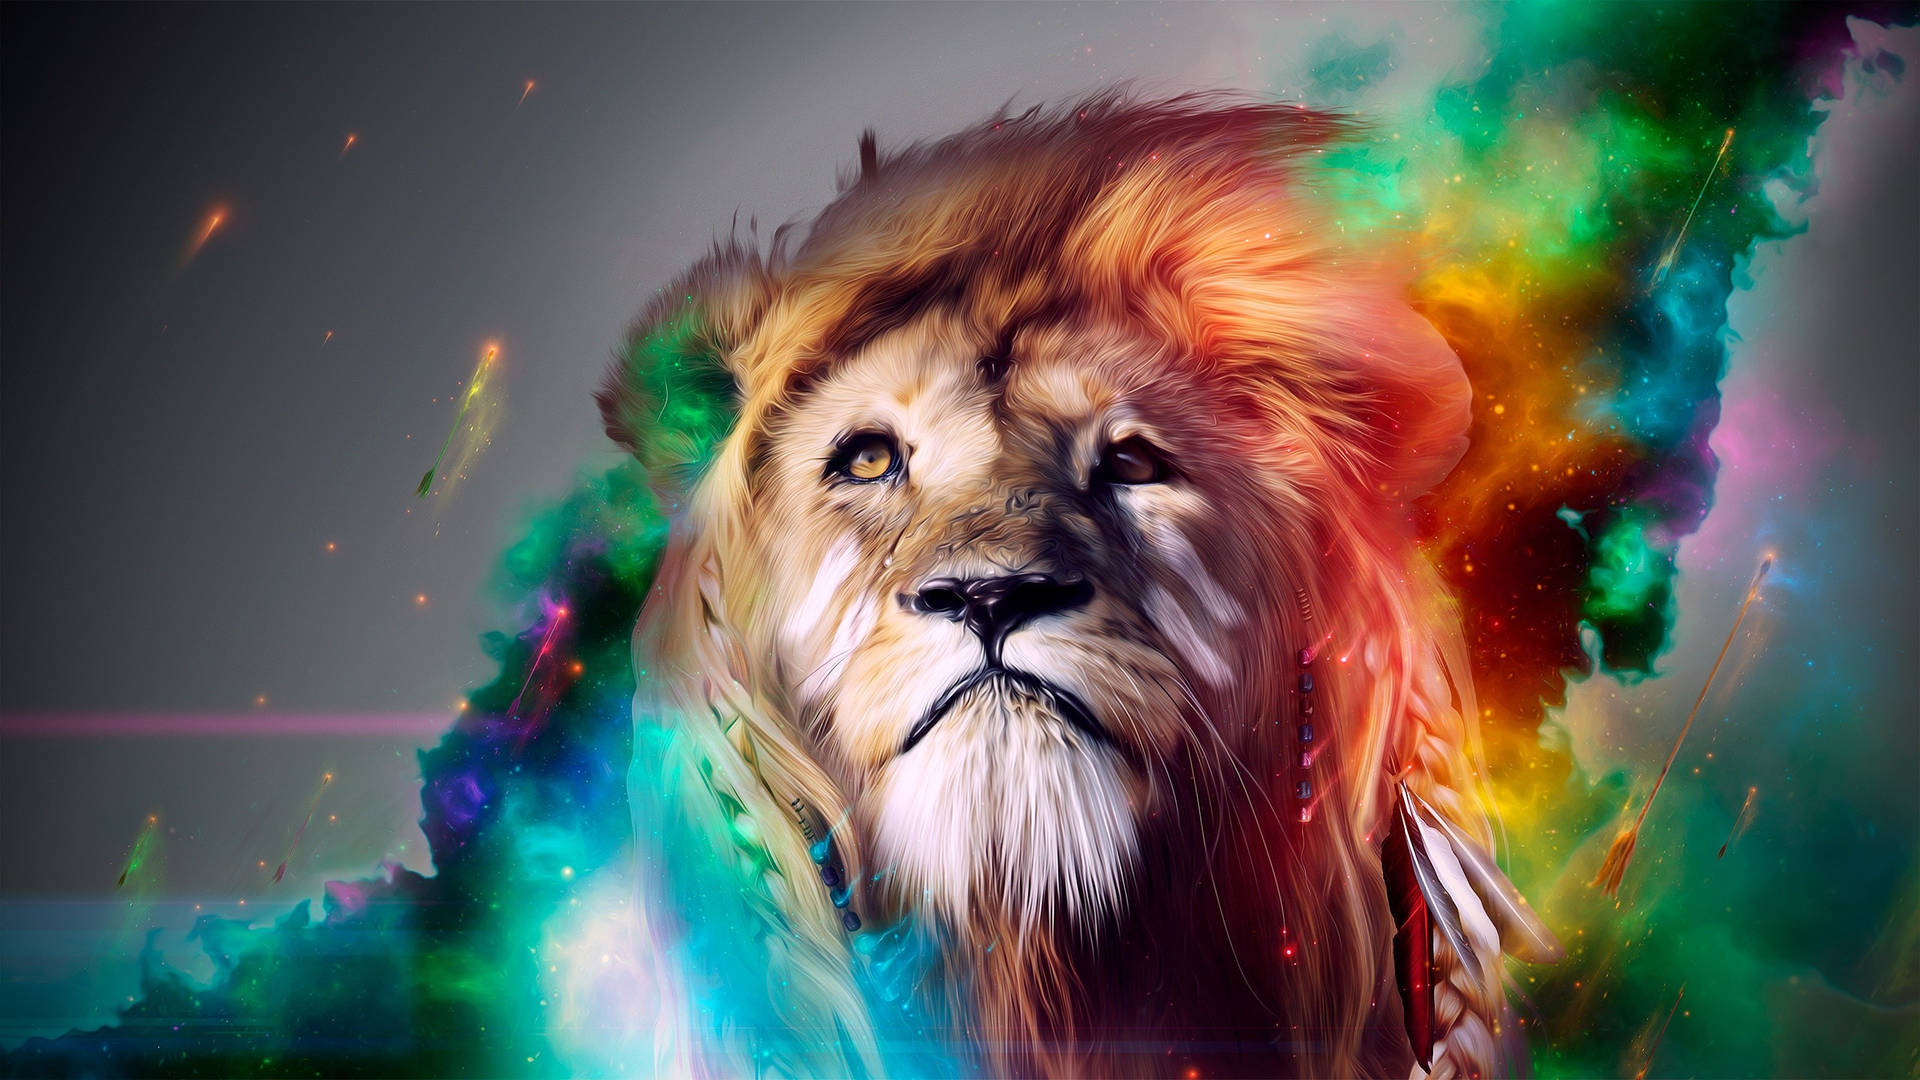 Free Lion Head Wallpaper Downloads, [200+] Lion Head Wallpapers for FREE |  